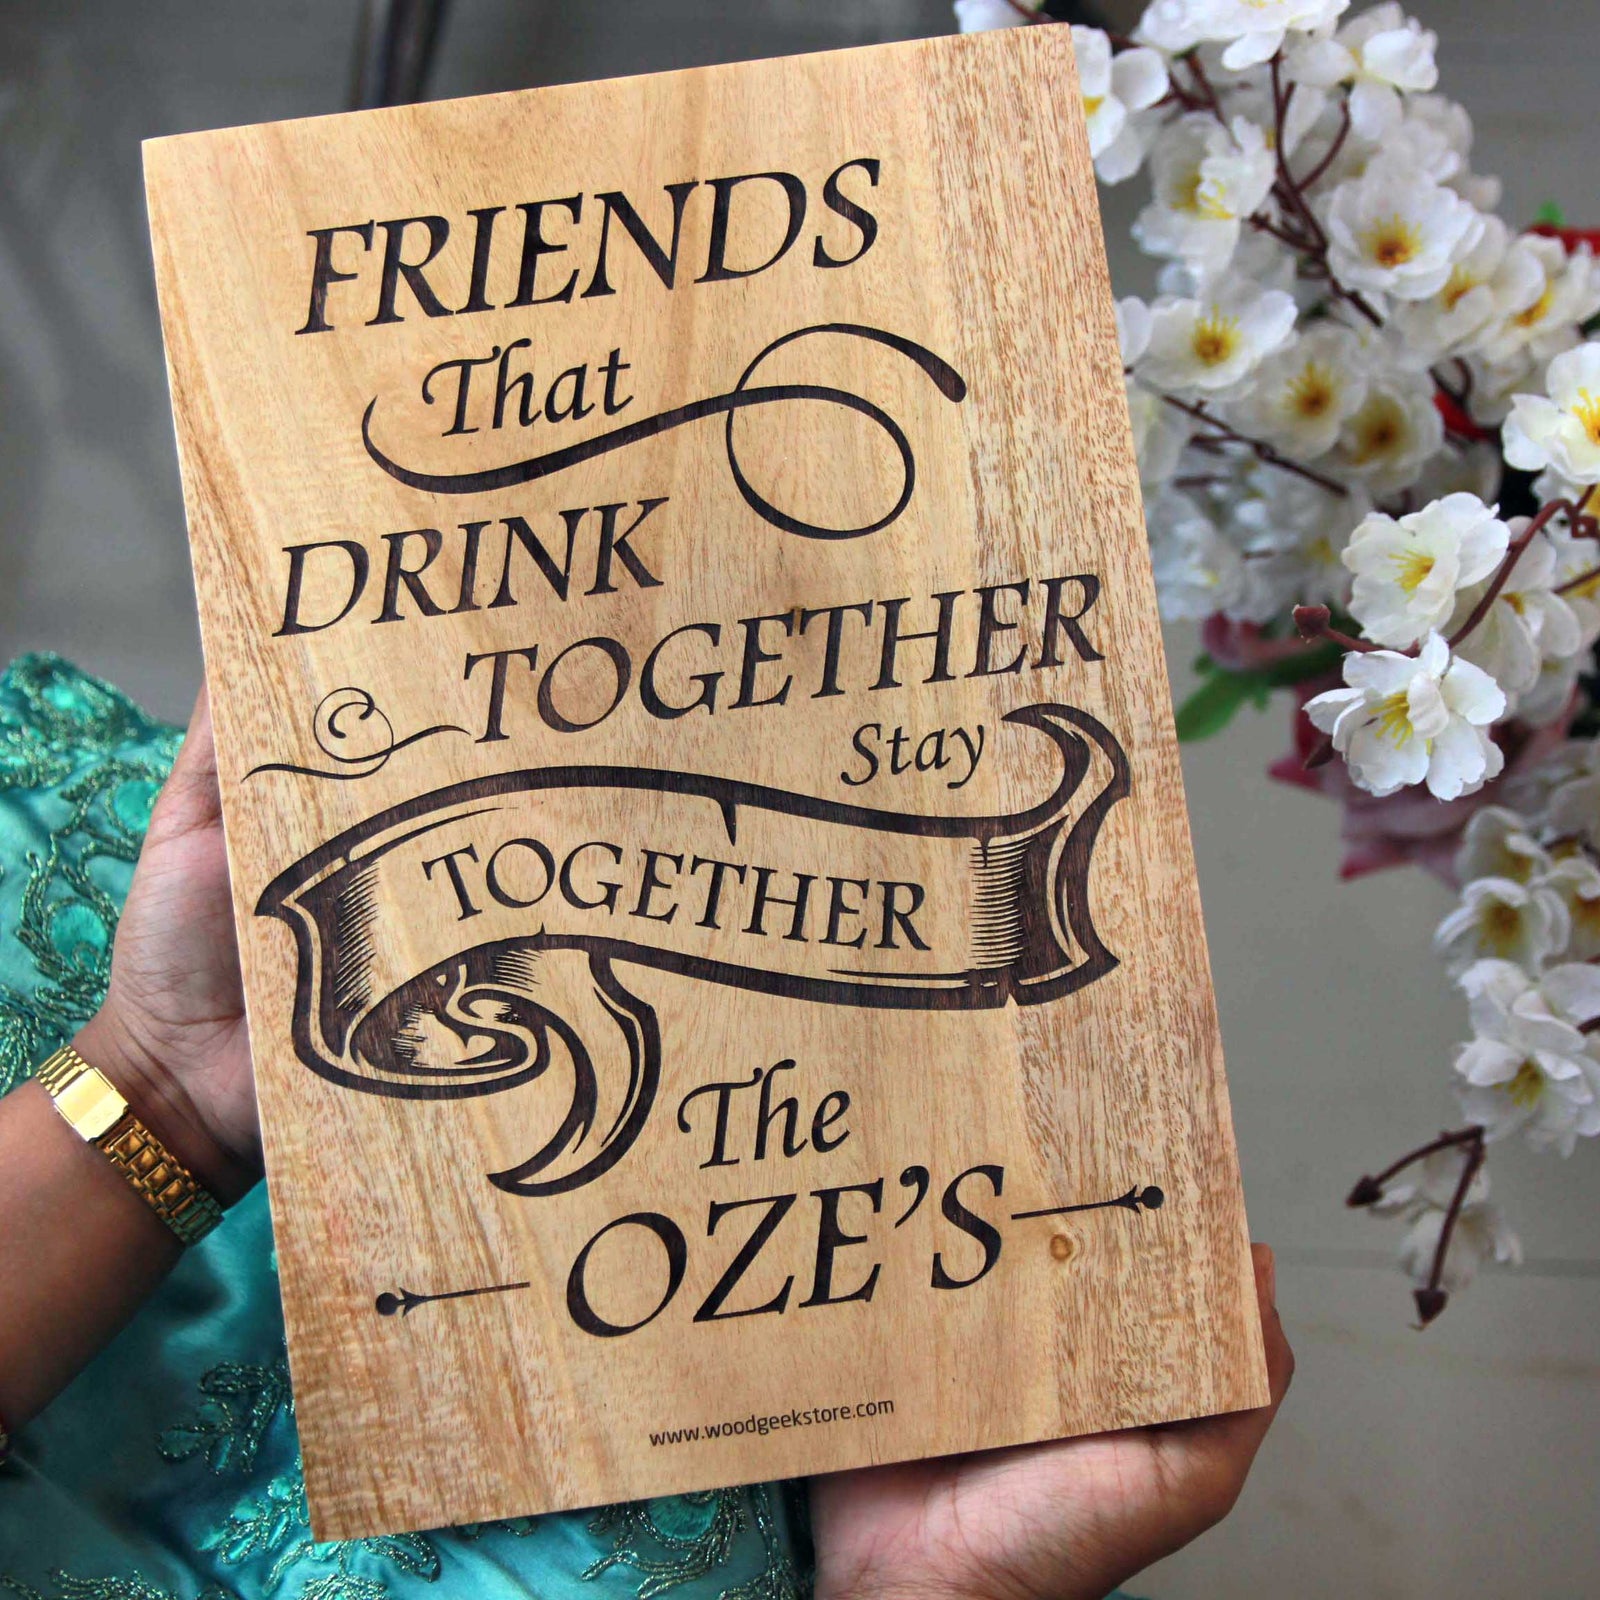 Amazon.com | Friendship Gifts for Women Friends - 8 Pieces Best Friend  Birthday Gifts, Sister Gifts from Sister, Sister Birthday Gift Ideas,  Unique Birthday Gifts for Best Friend Sister Bestie Soul Sister: